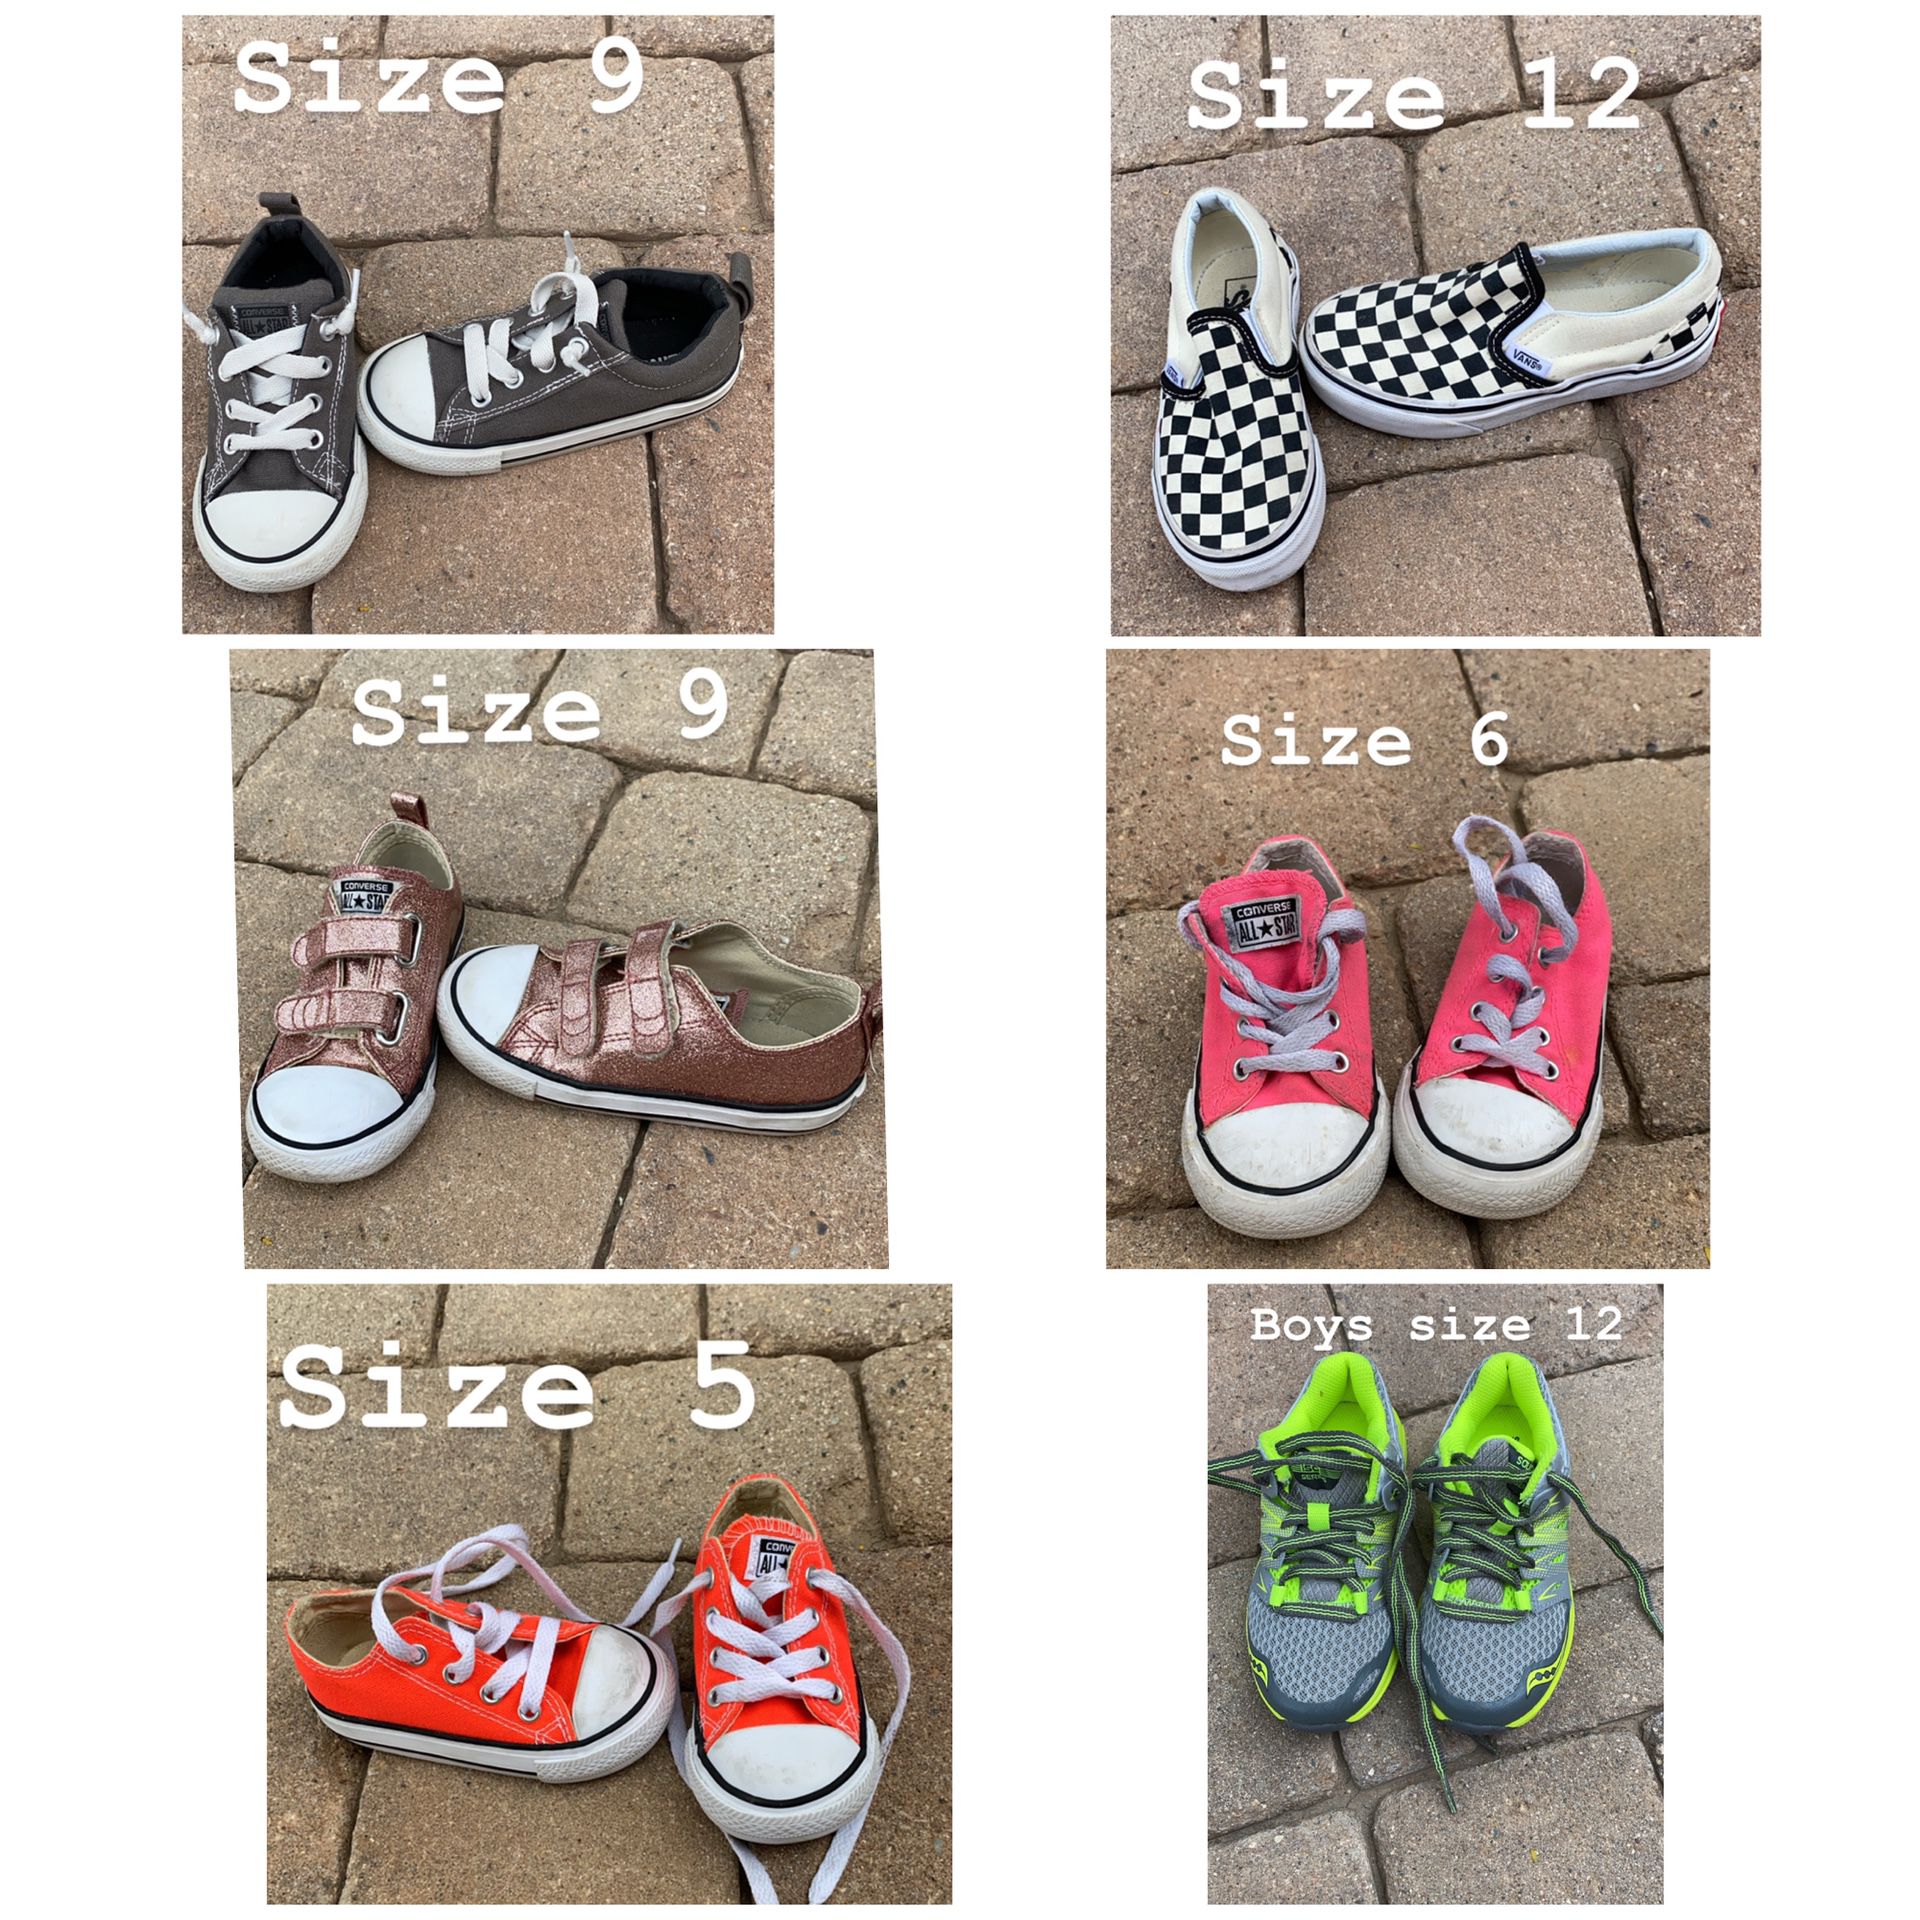 Kids shoes - authentic converse and 1 pair of brand new saucony - $5 each pair